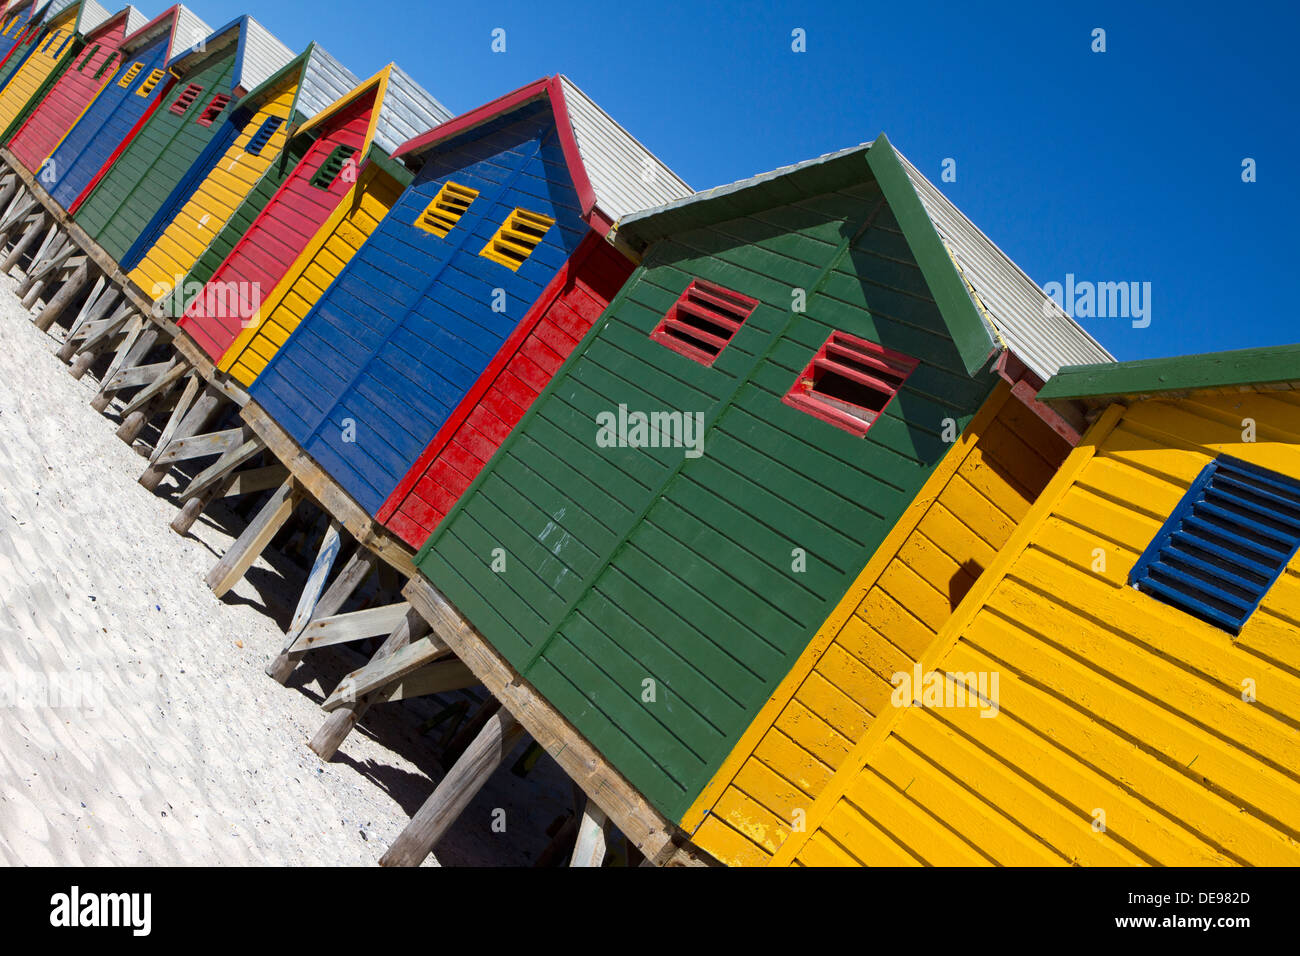 Painted beach huts on Muizenberg Beach, South Africa. Stock Photo